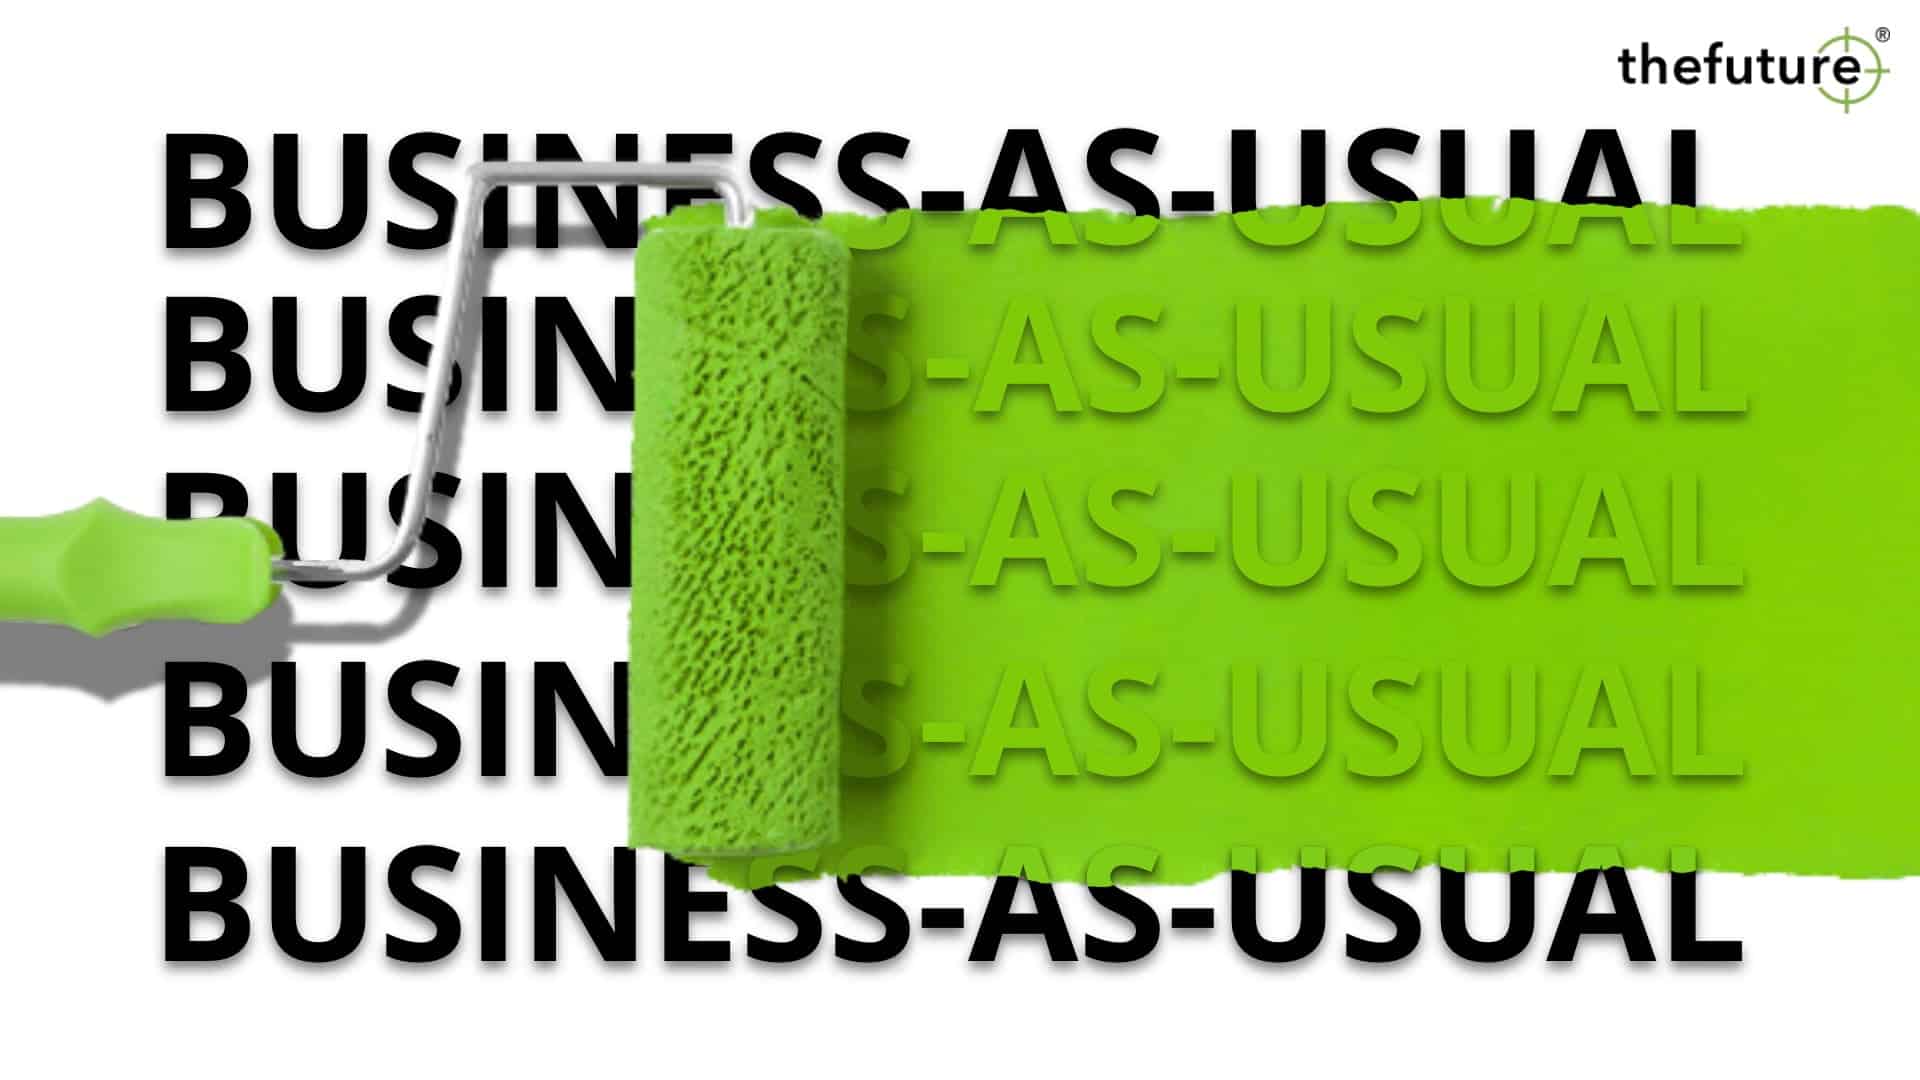 thefuture, blogg, Greenwash-Business-as-usual